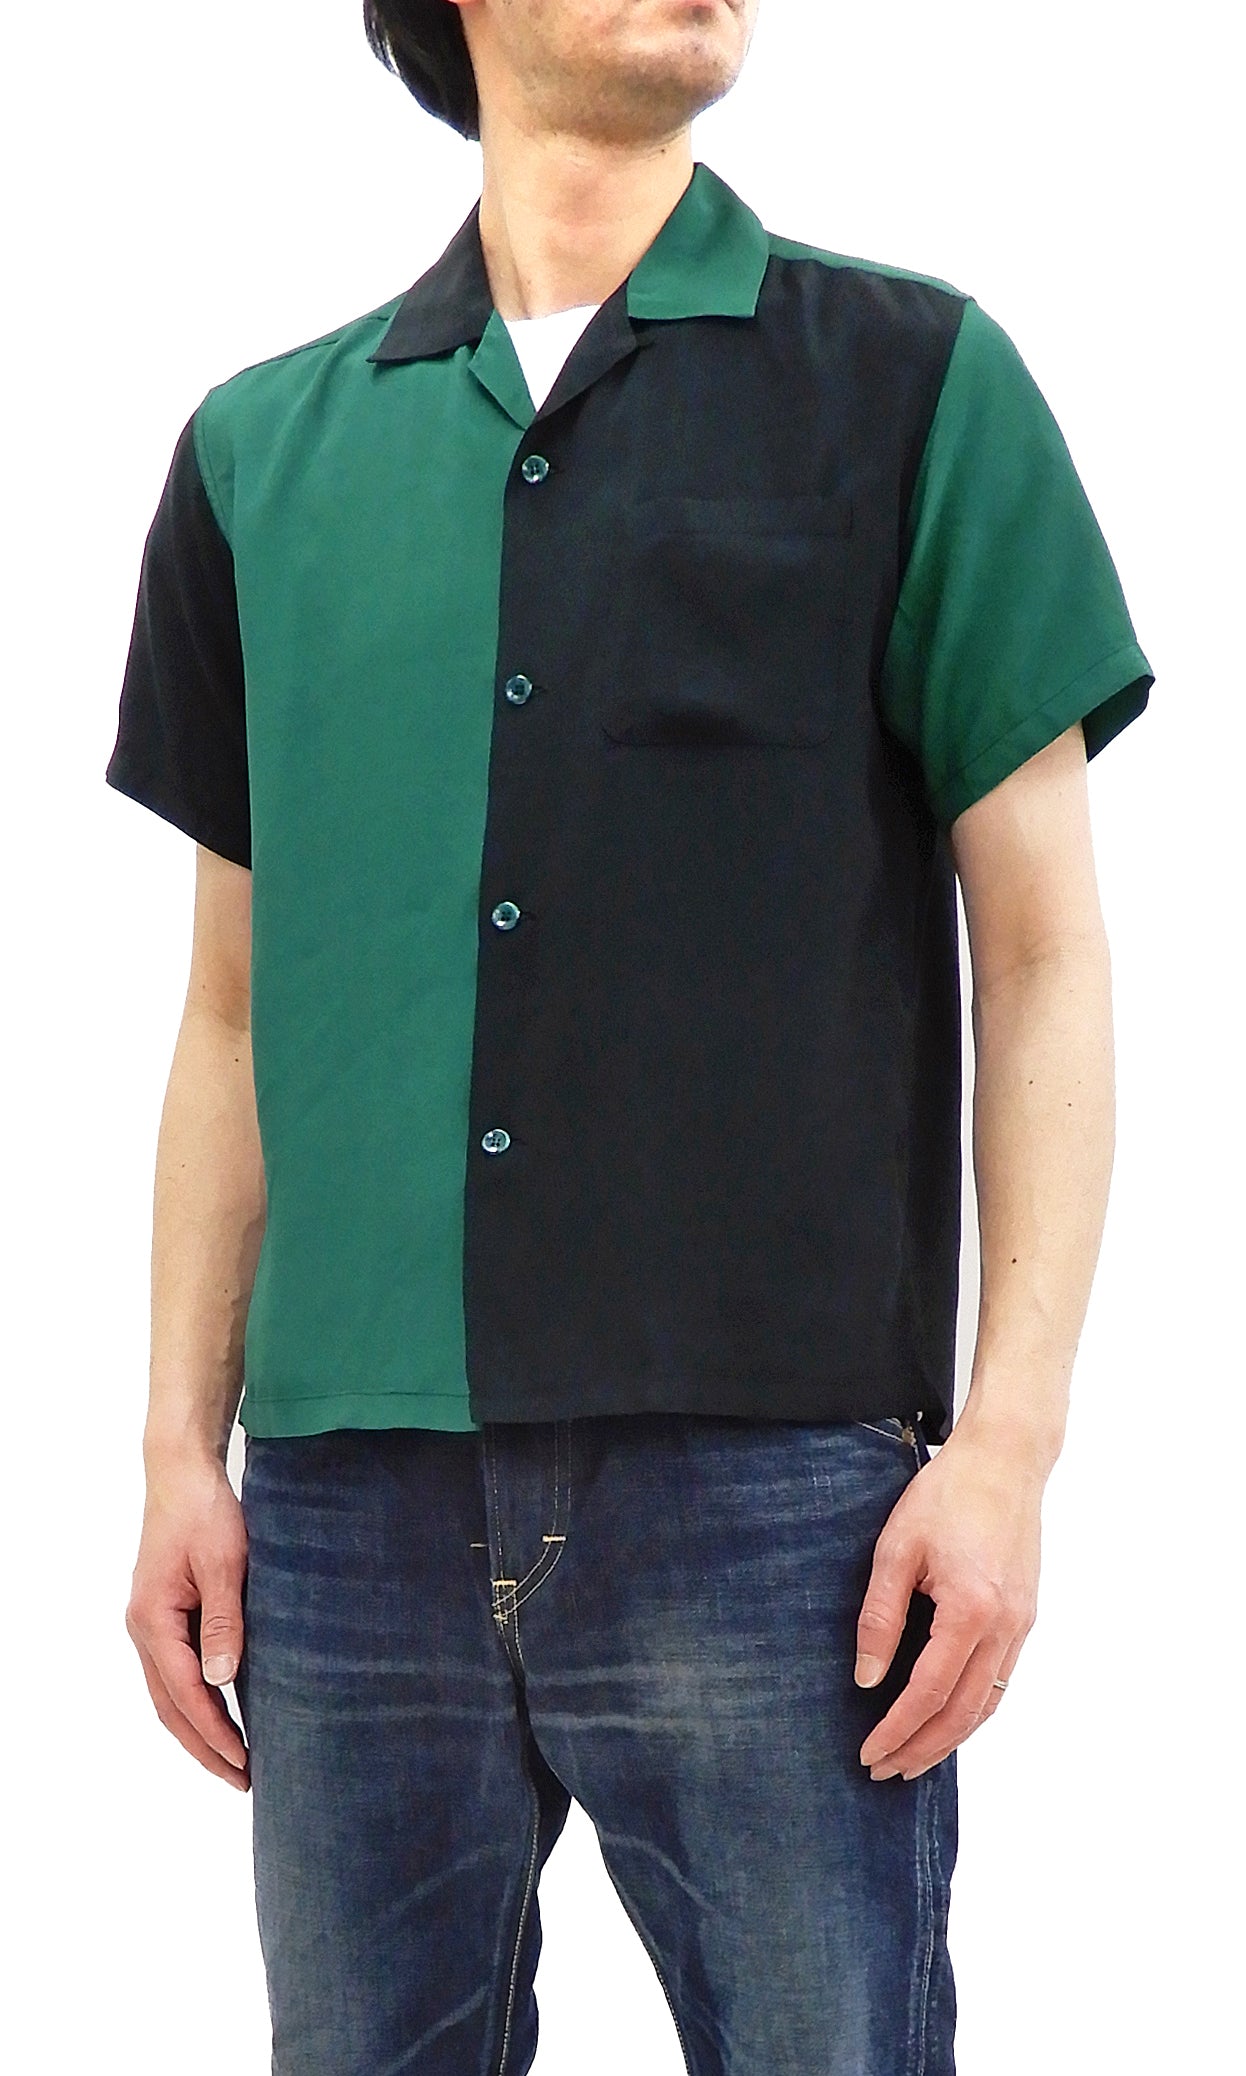 Style Eyes Bowling Shirt Men's 1950s Style Two-Tone Panel Short 